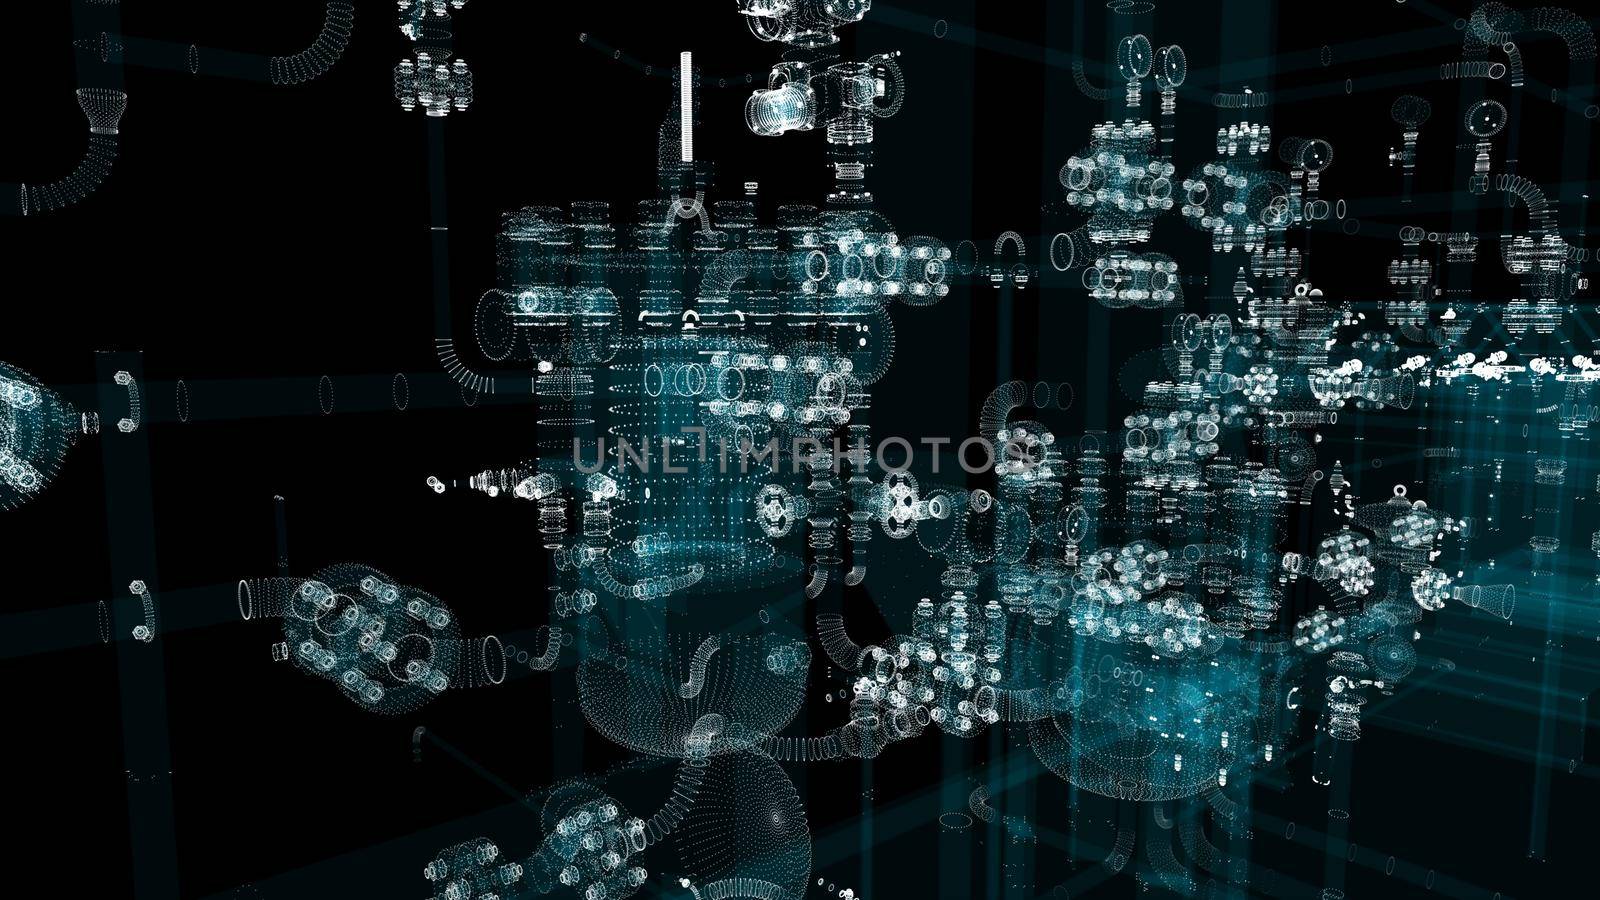 Industrial Technology Concept. Particle hologram industrial equipment, valves, pipes and sensors. Industry 4.0 High Tech Concept. 3d illustration